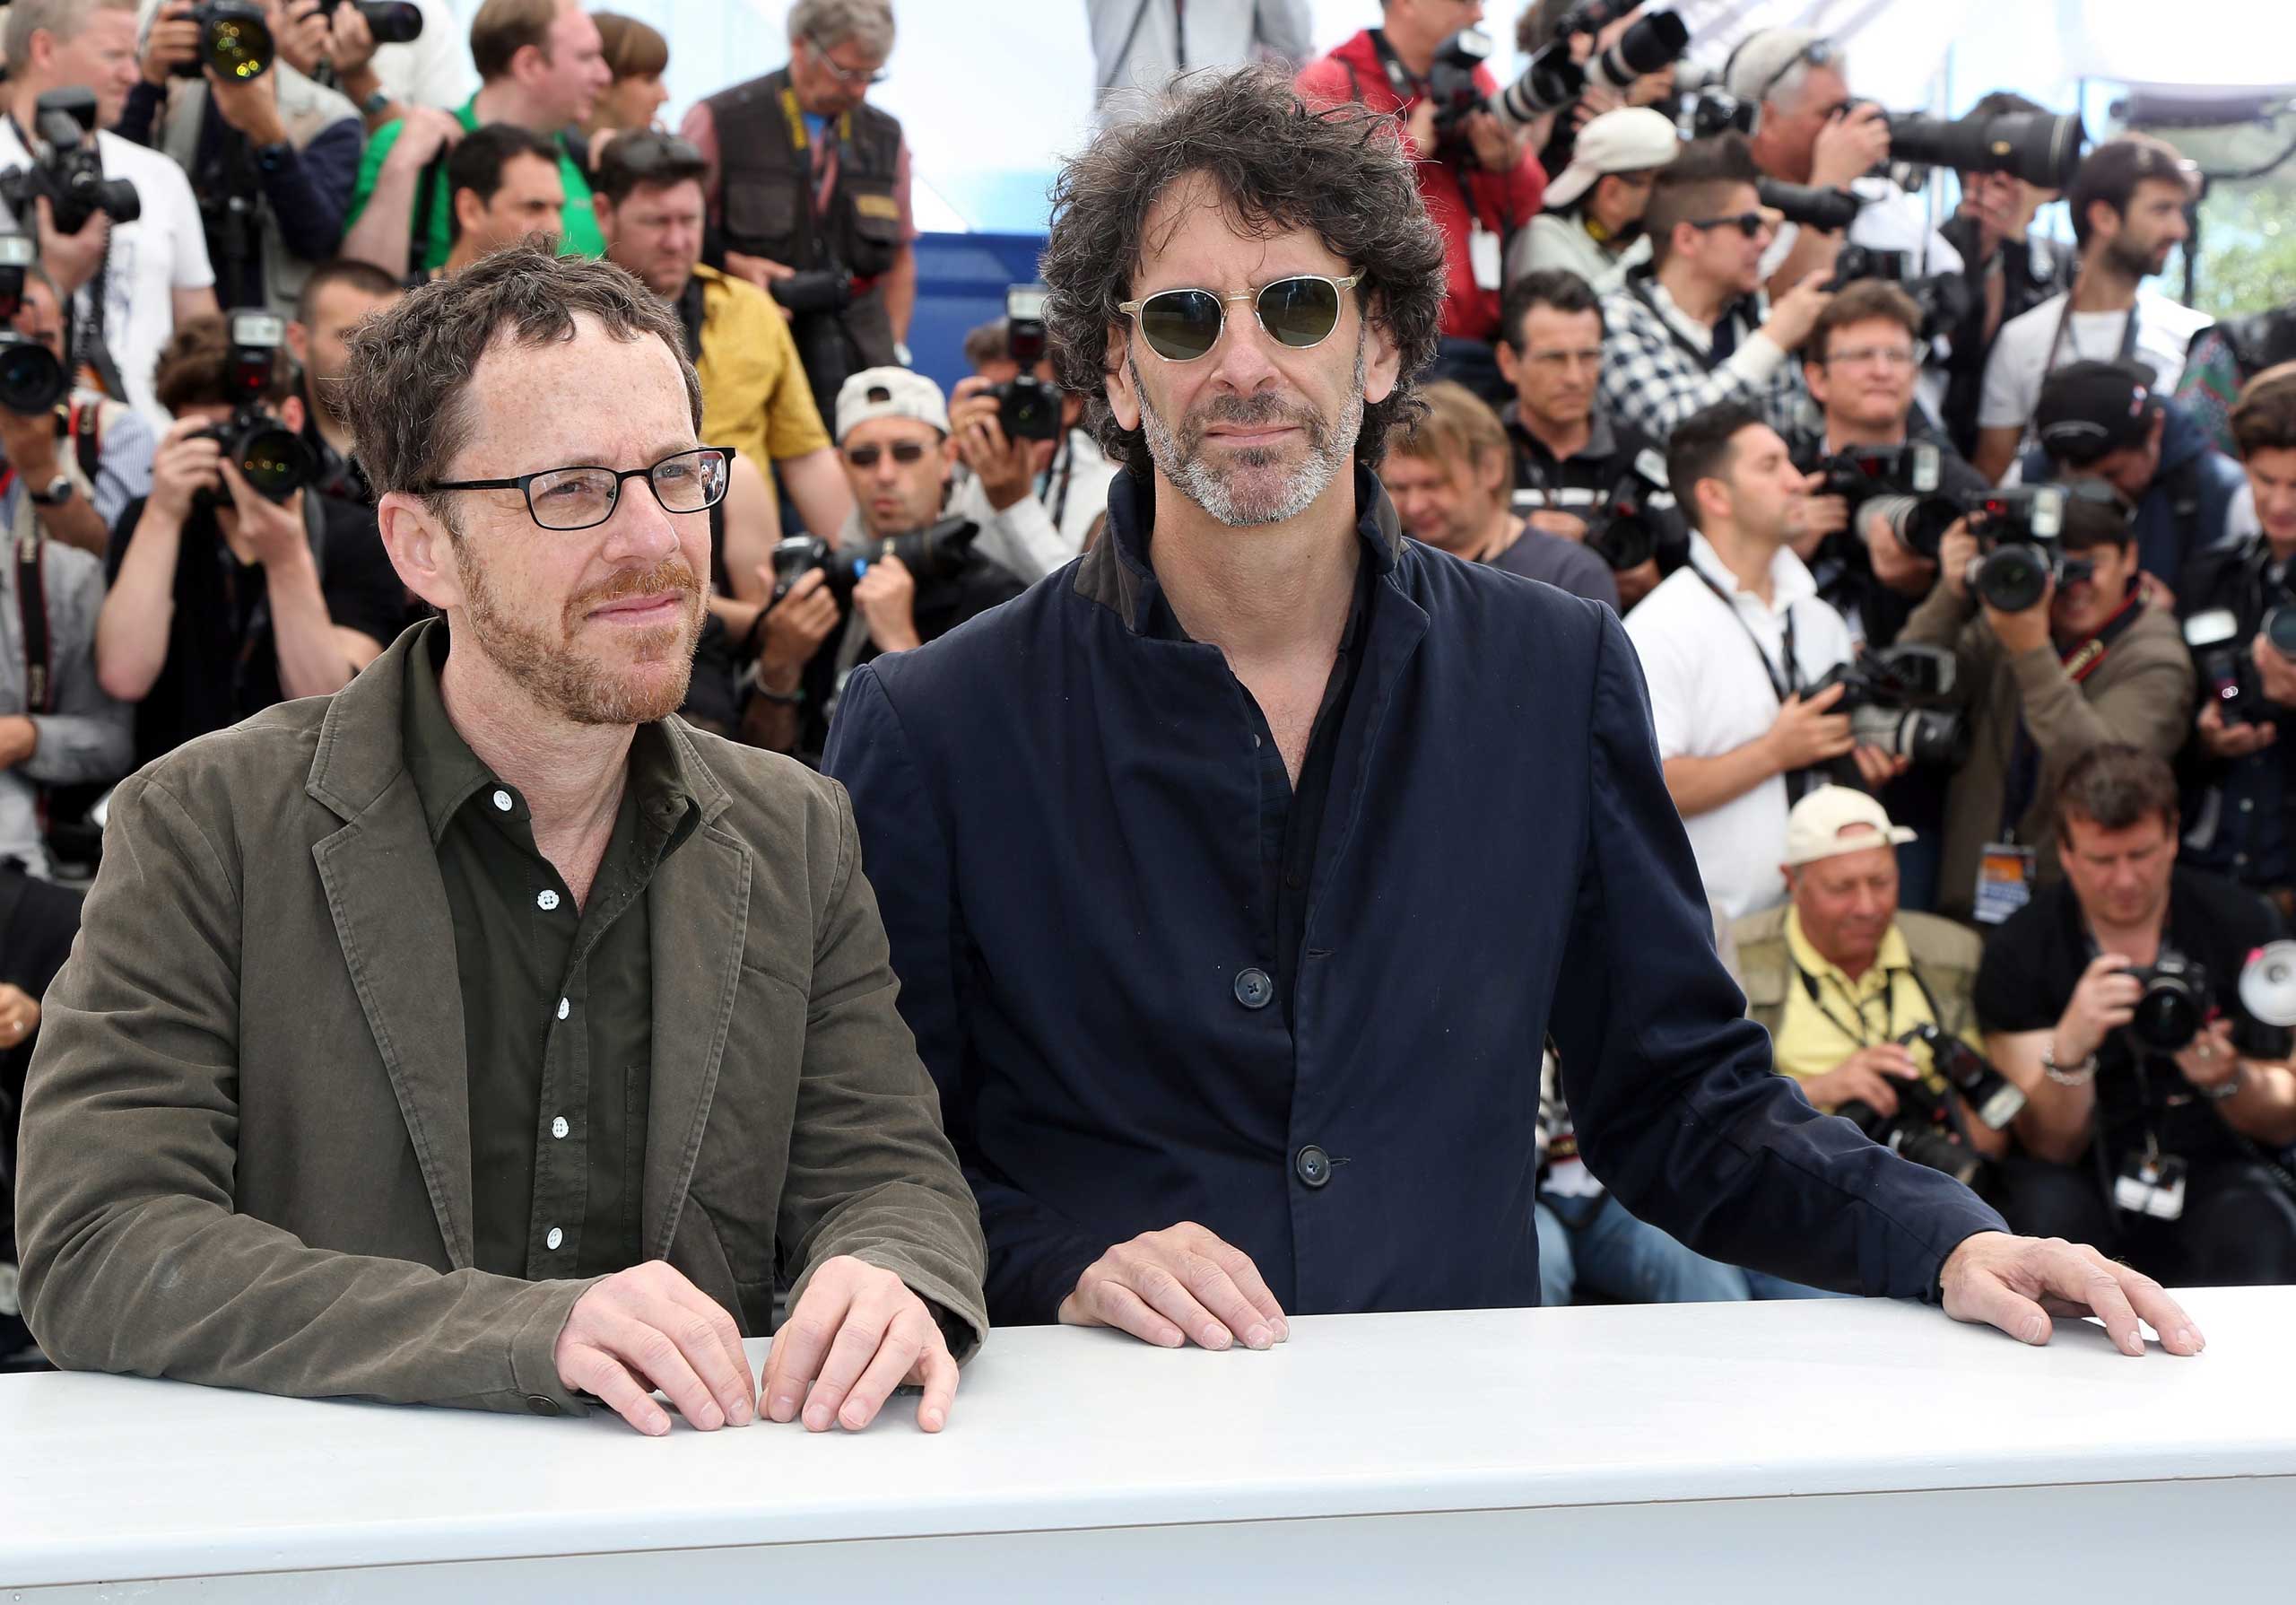 Directors Ethan Cohen (L) and Joel Cohen (R) during the photocall for 'Inside Llewyn Davis' at the 66th annual Cannes Film Festival in Cannes, France, May 19, 2013. (Sebastien Nogier—EPA)